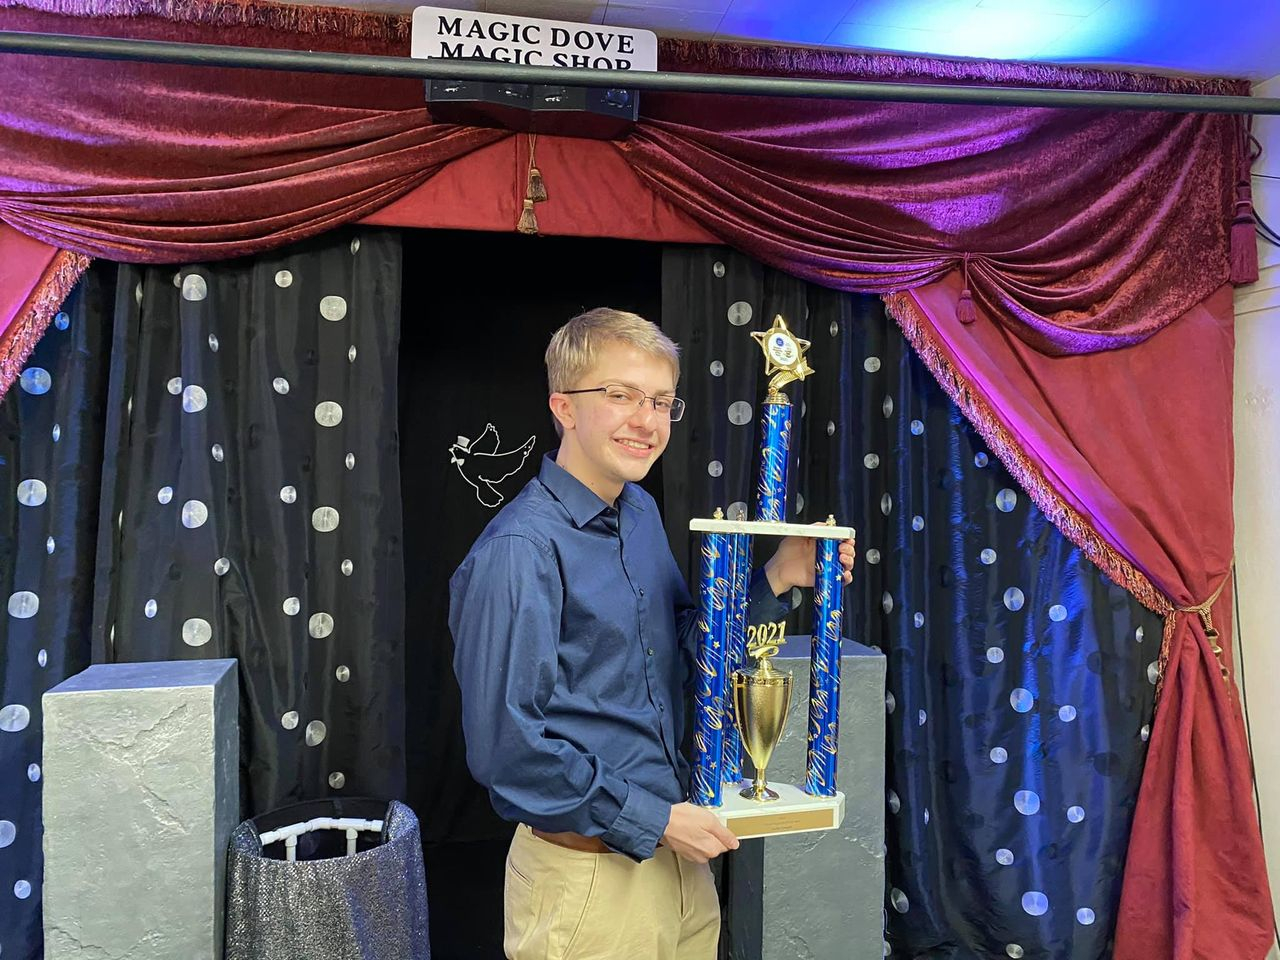 A young man holding a trophy in front of a curtain.